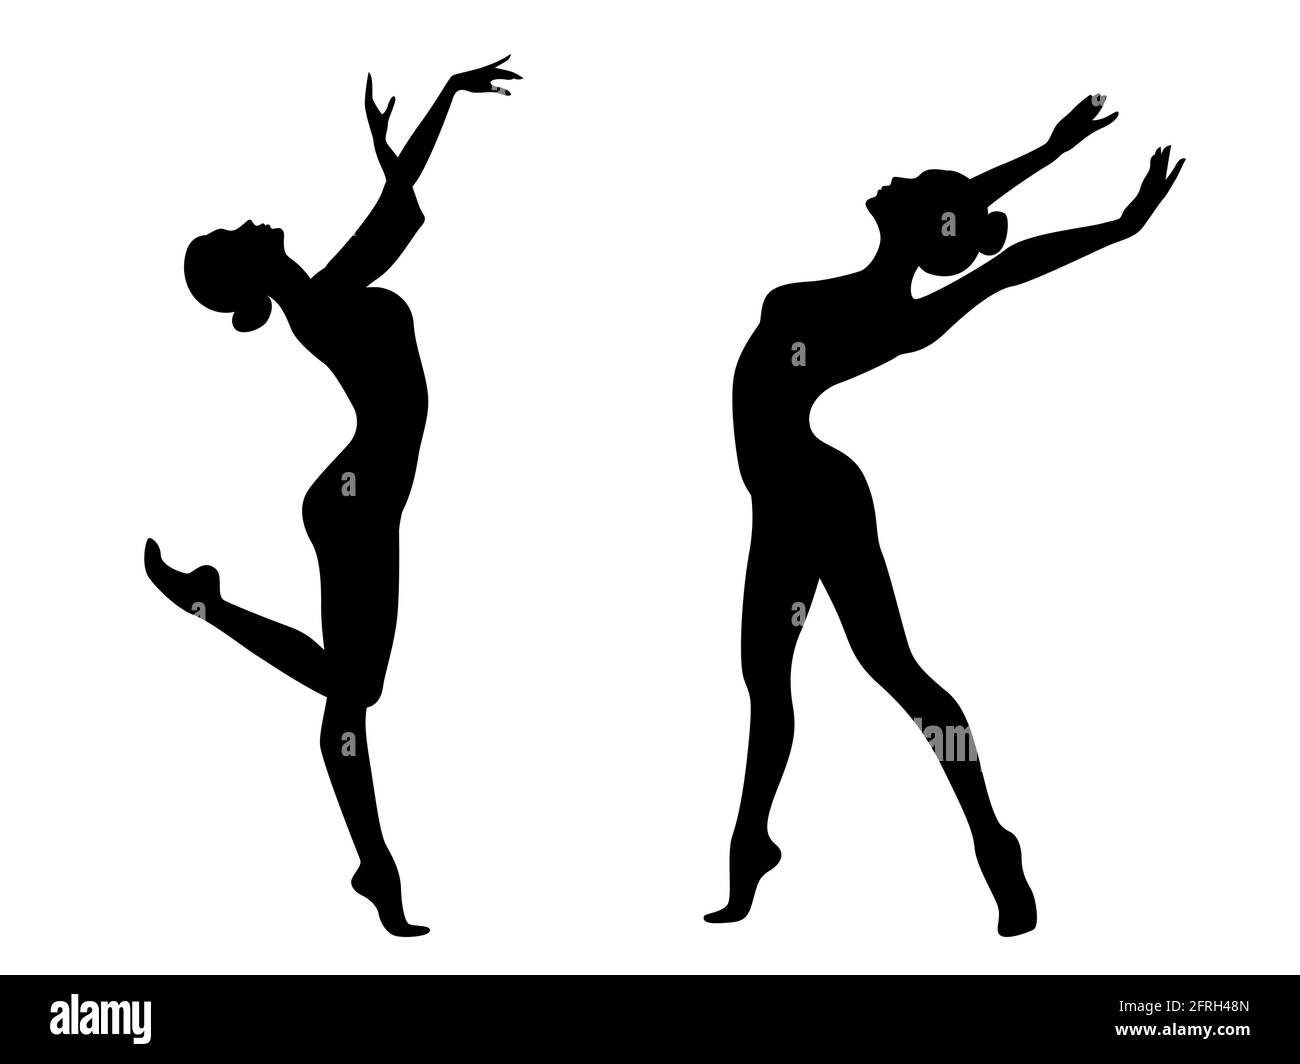 Abstract black stencil silhouettes of slender charming women dancer in move, hand drawing vector illustration Stock Vector